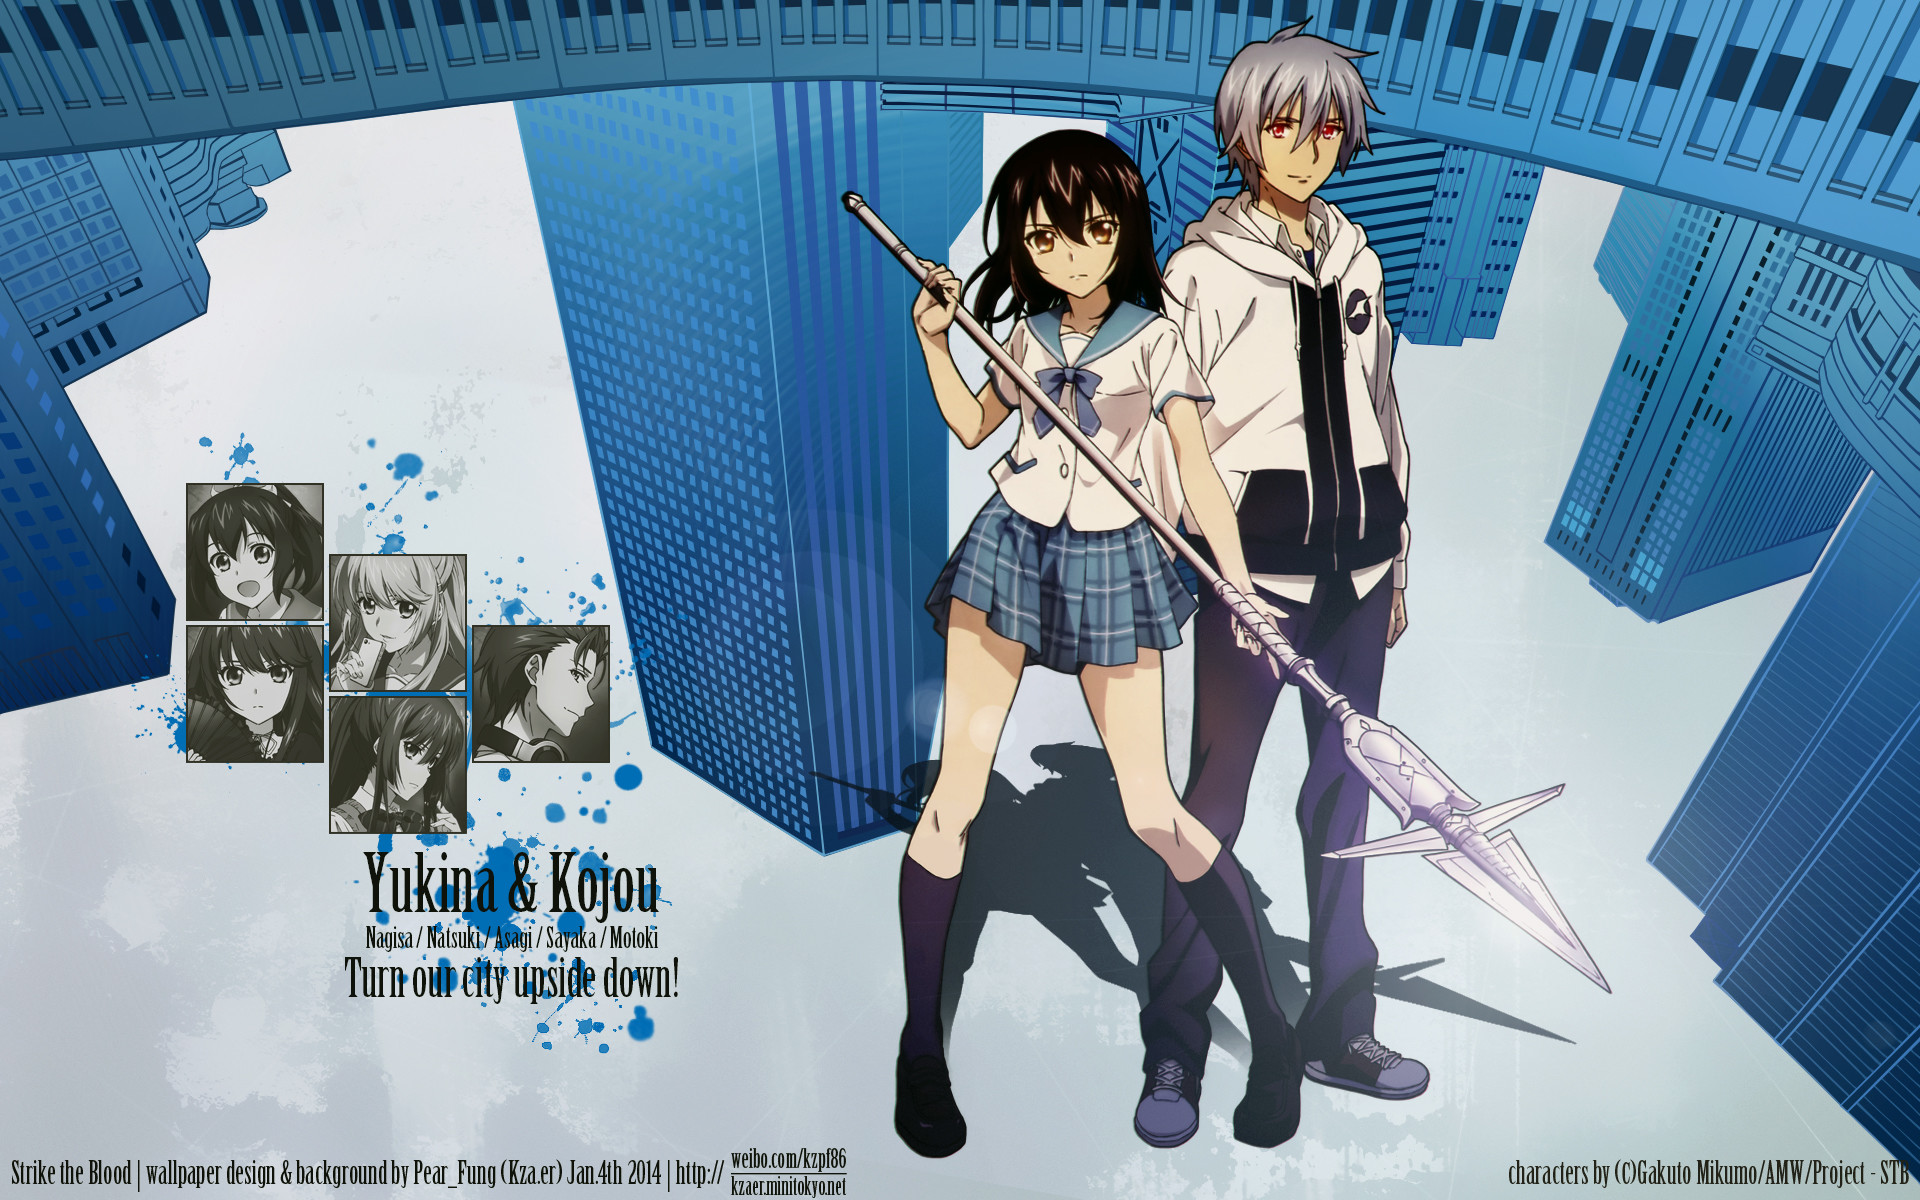 1920x1200 18 Strike The Blood HD Wallpapers | Backgrounds - Wallpaper Abyss | Images  Wallpapers | Pinterest | Wallpaper backgrounds and Wallpaper